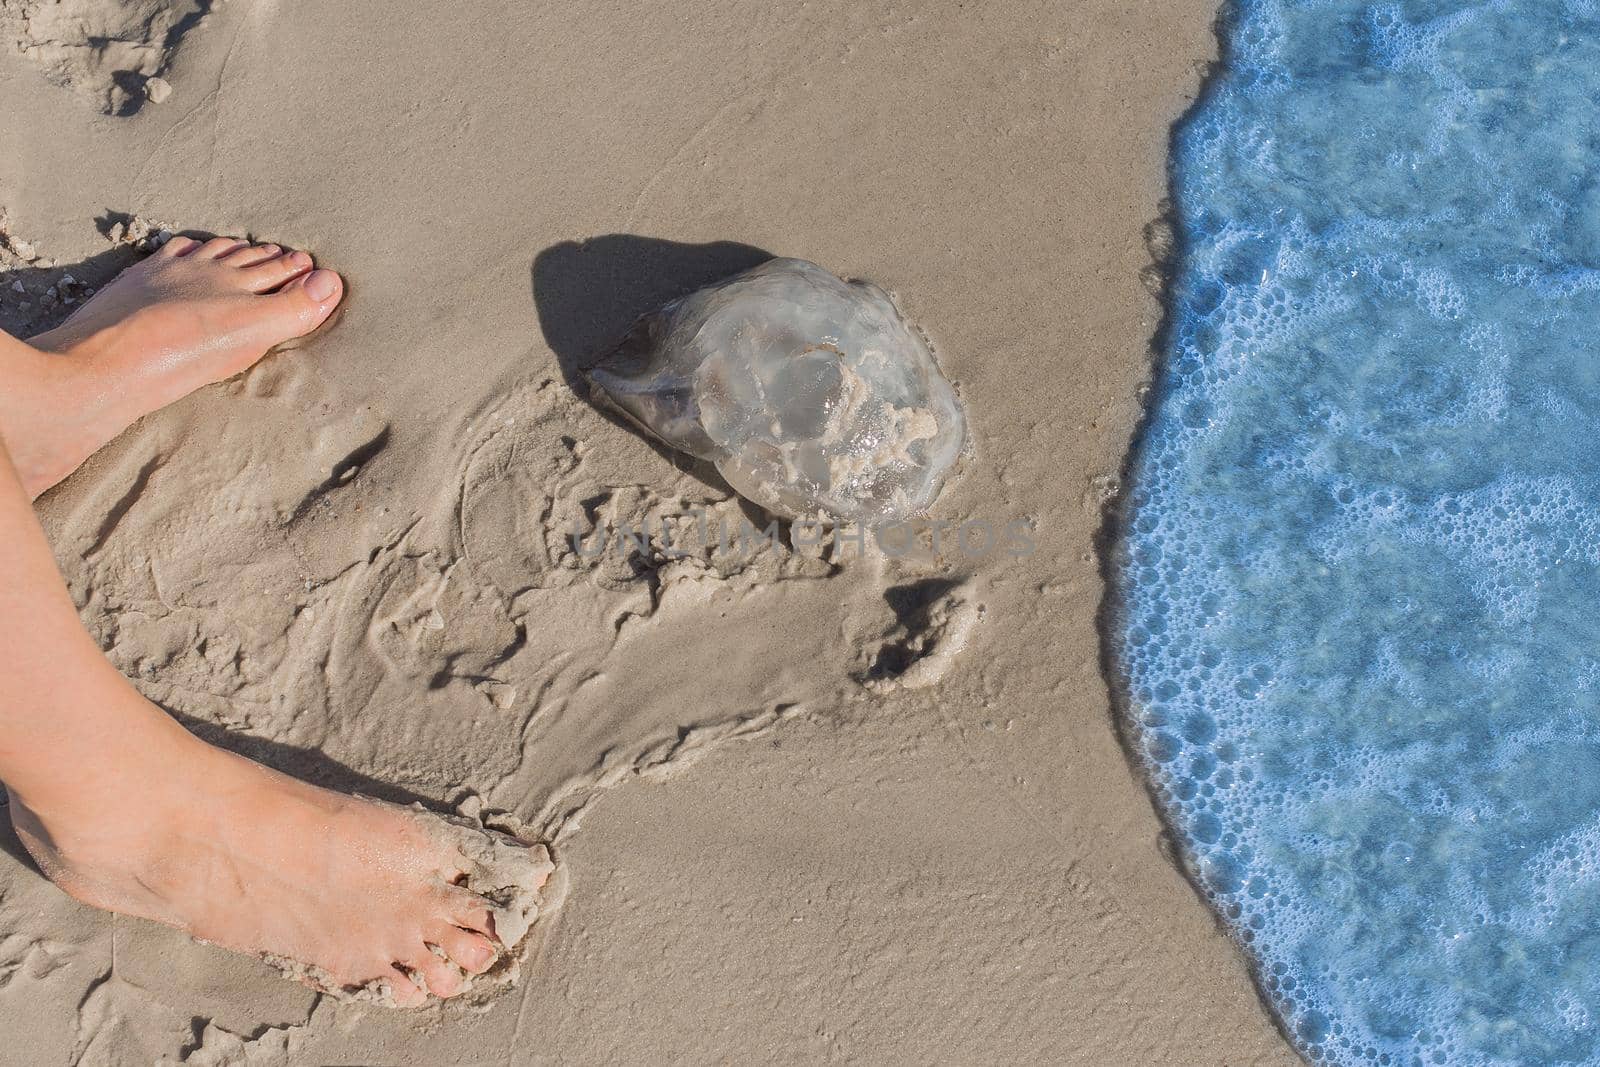 The girl's feet stand next to a jellyfish lying on the beach sea shore by the water.